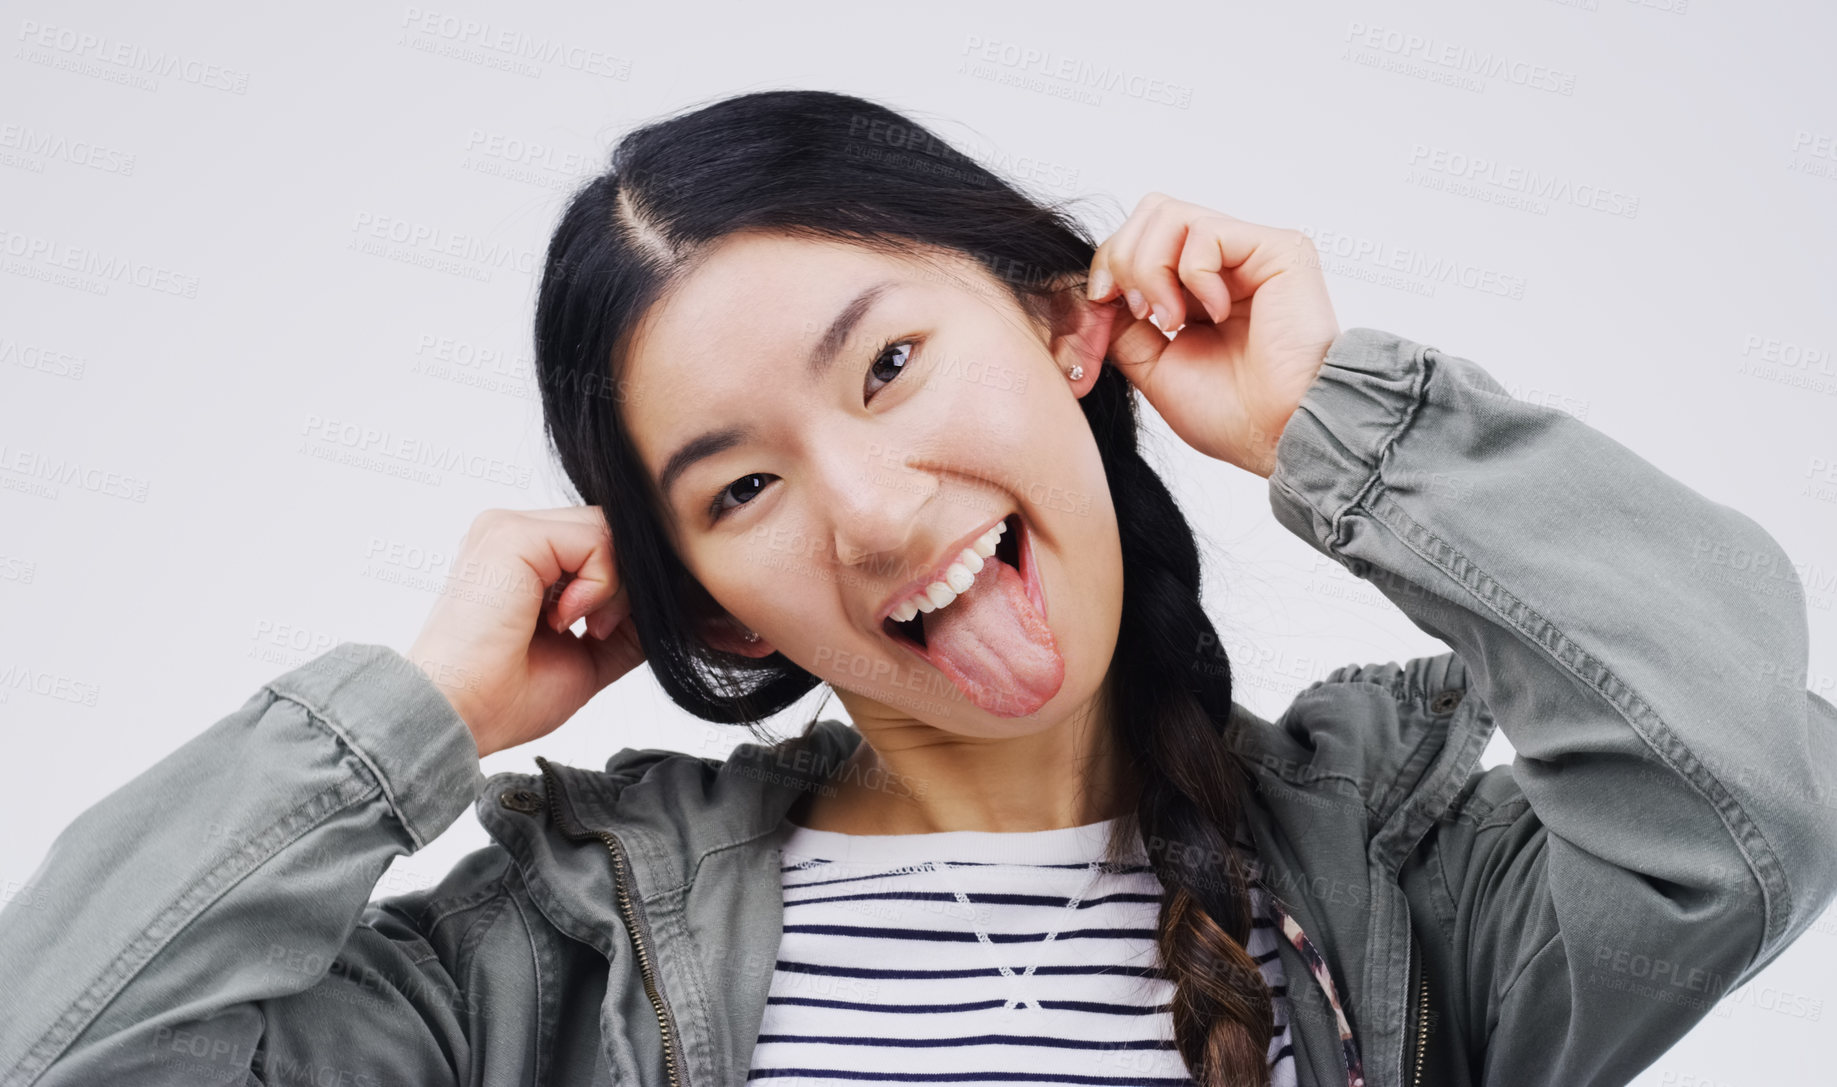 Buy stock photo Portrait, funny face and ears with an asian woman in studio on a gray background looking silly or goofy. Comedy, comic and crazy with a playful young female person joking indoor for fun or humor